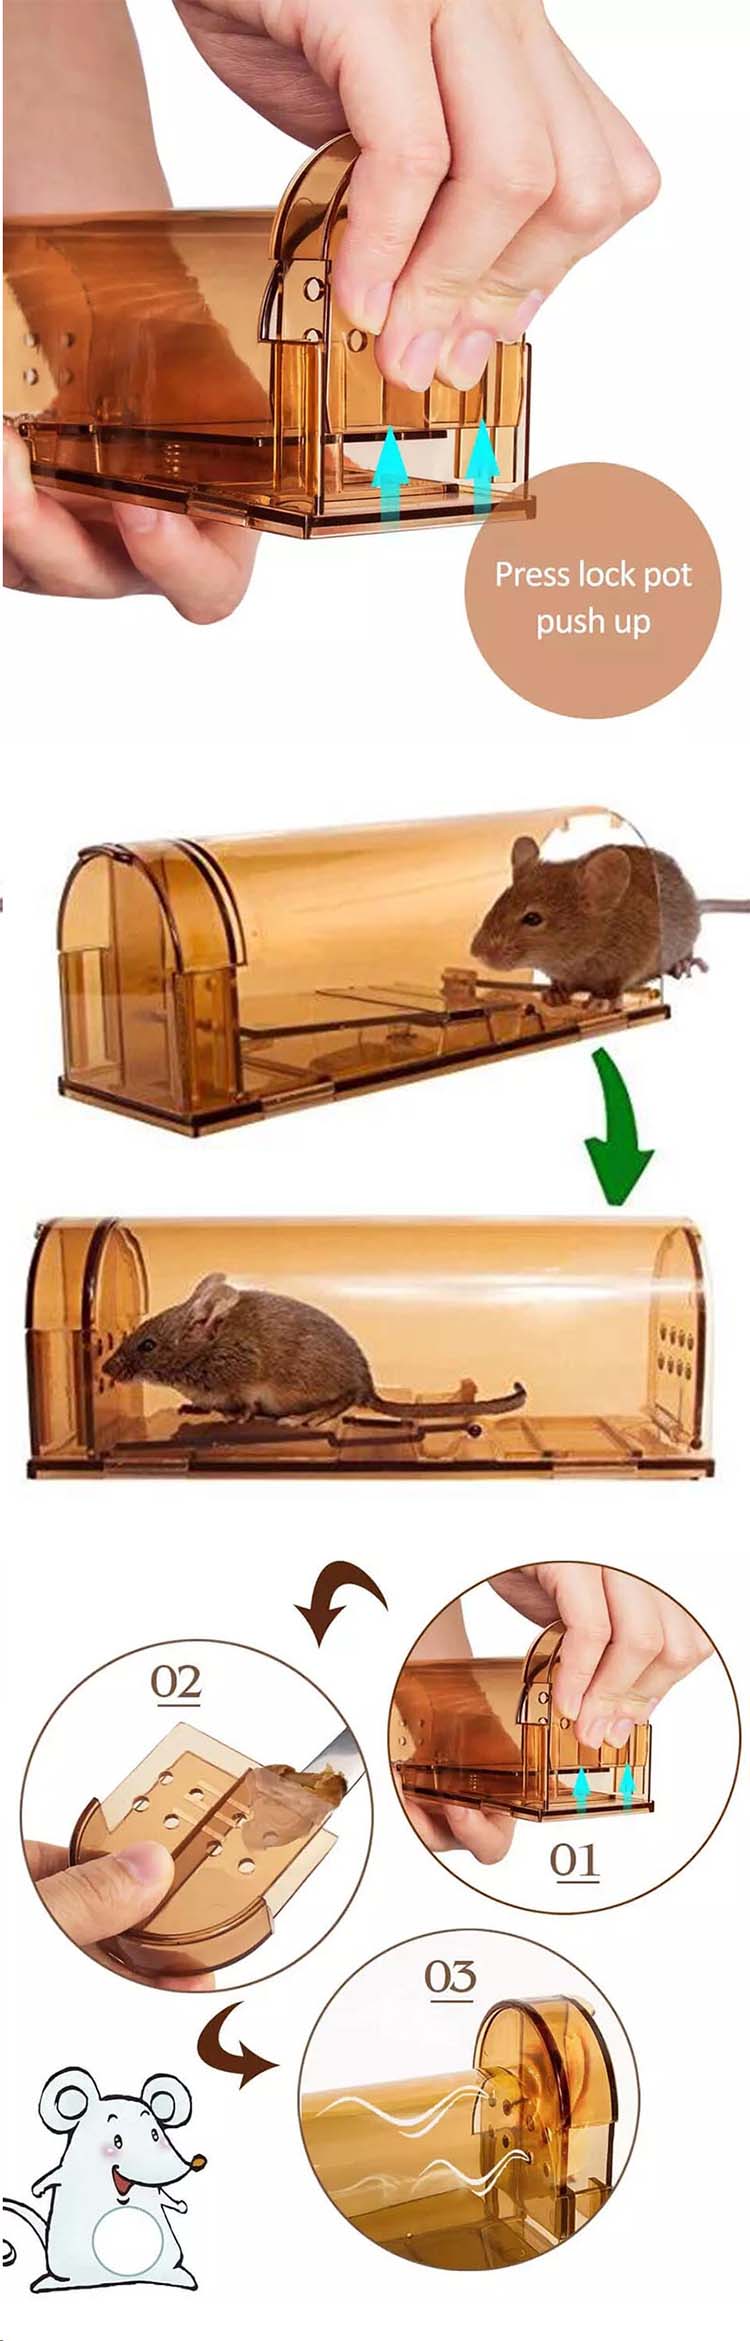 2019 Amazon Hot Sell Plastic Household Plastic Humane Live Glac Luchag Smart ribe Rat Mouse Trap Cage03